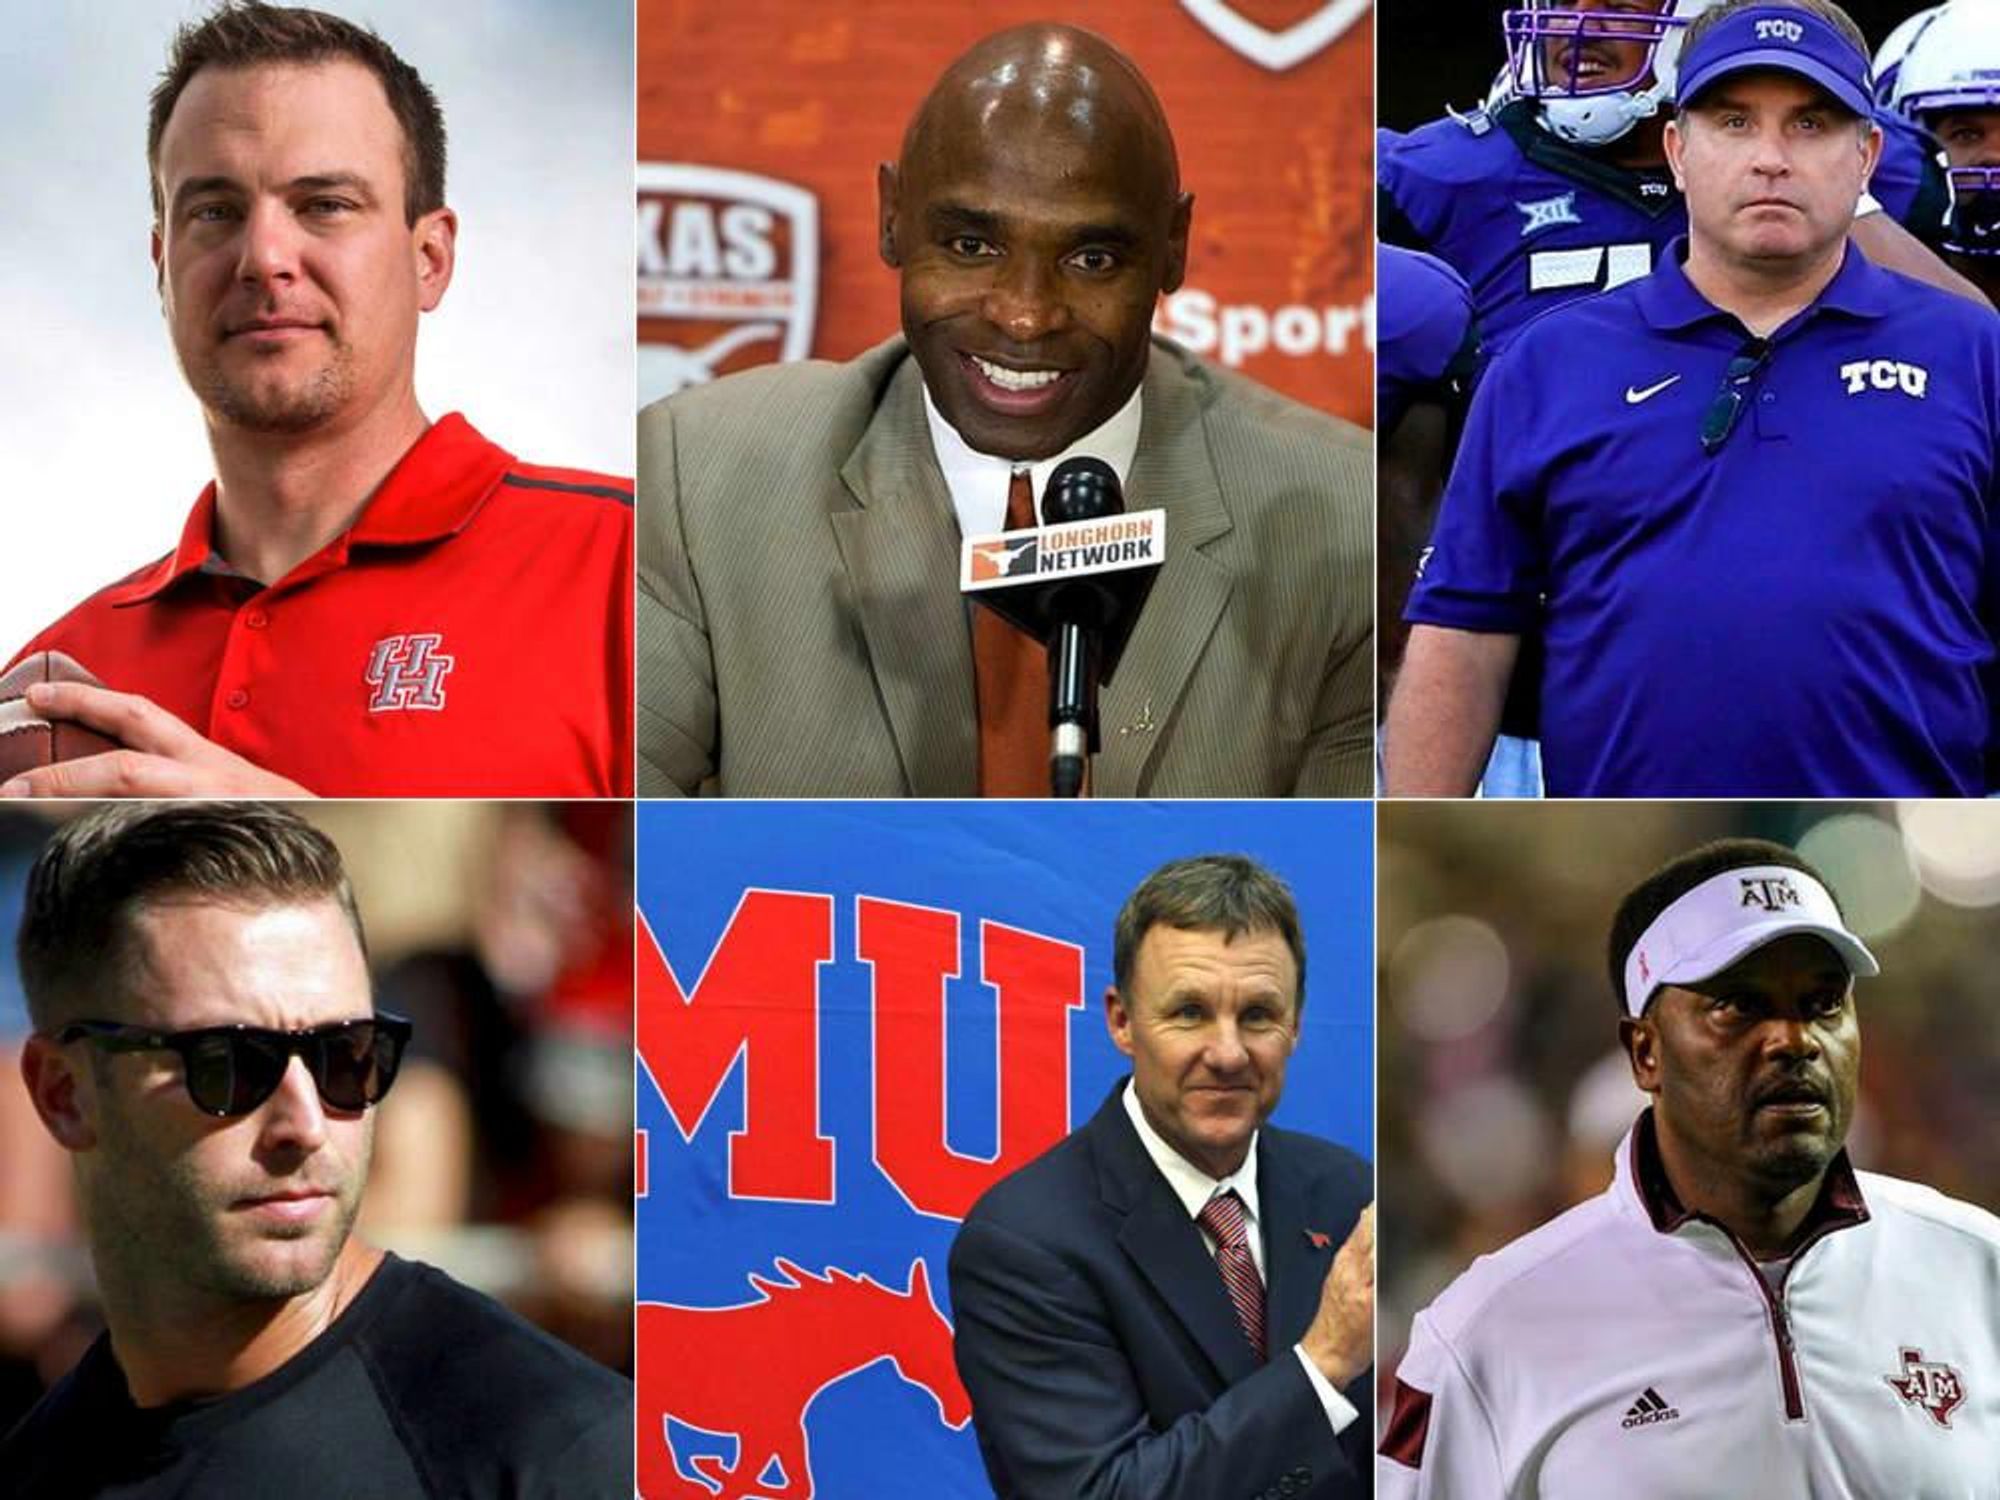 Houston, hottest college football coach in Texas, August 2015, collage